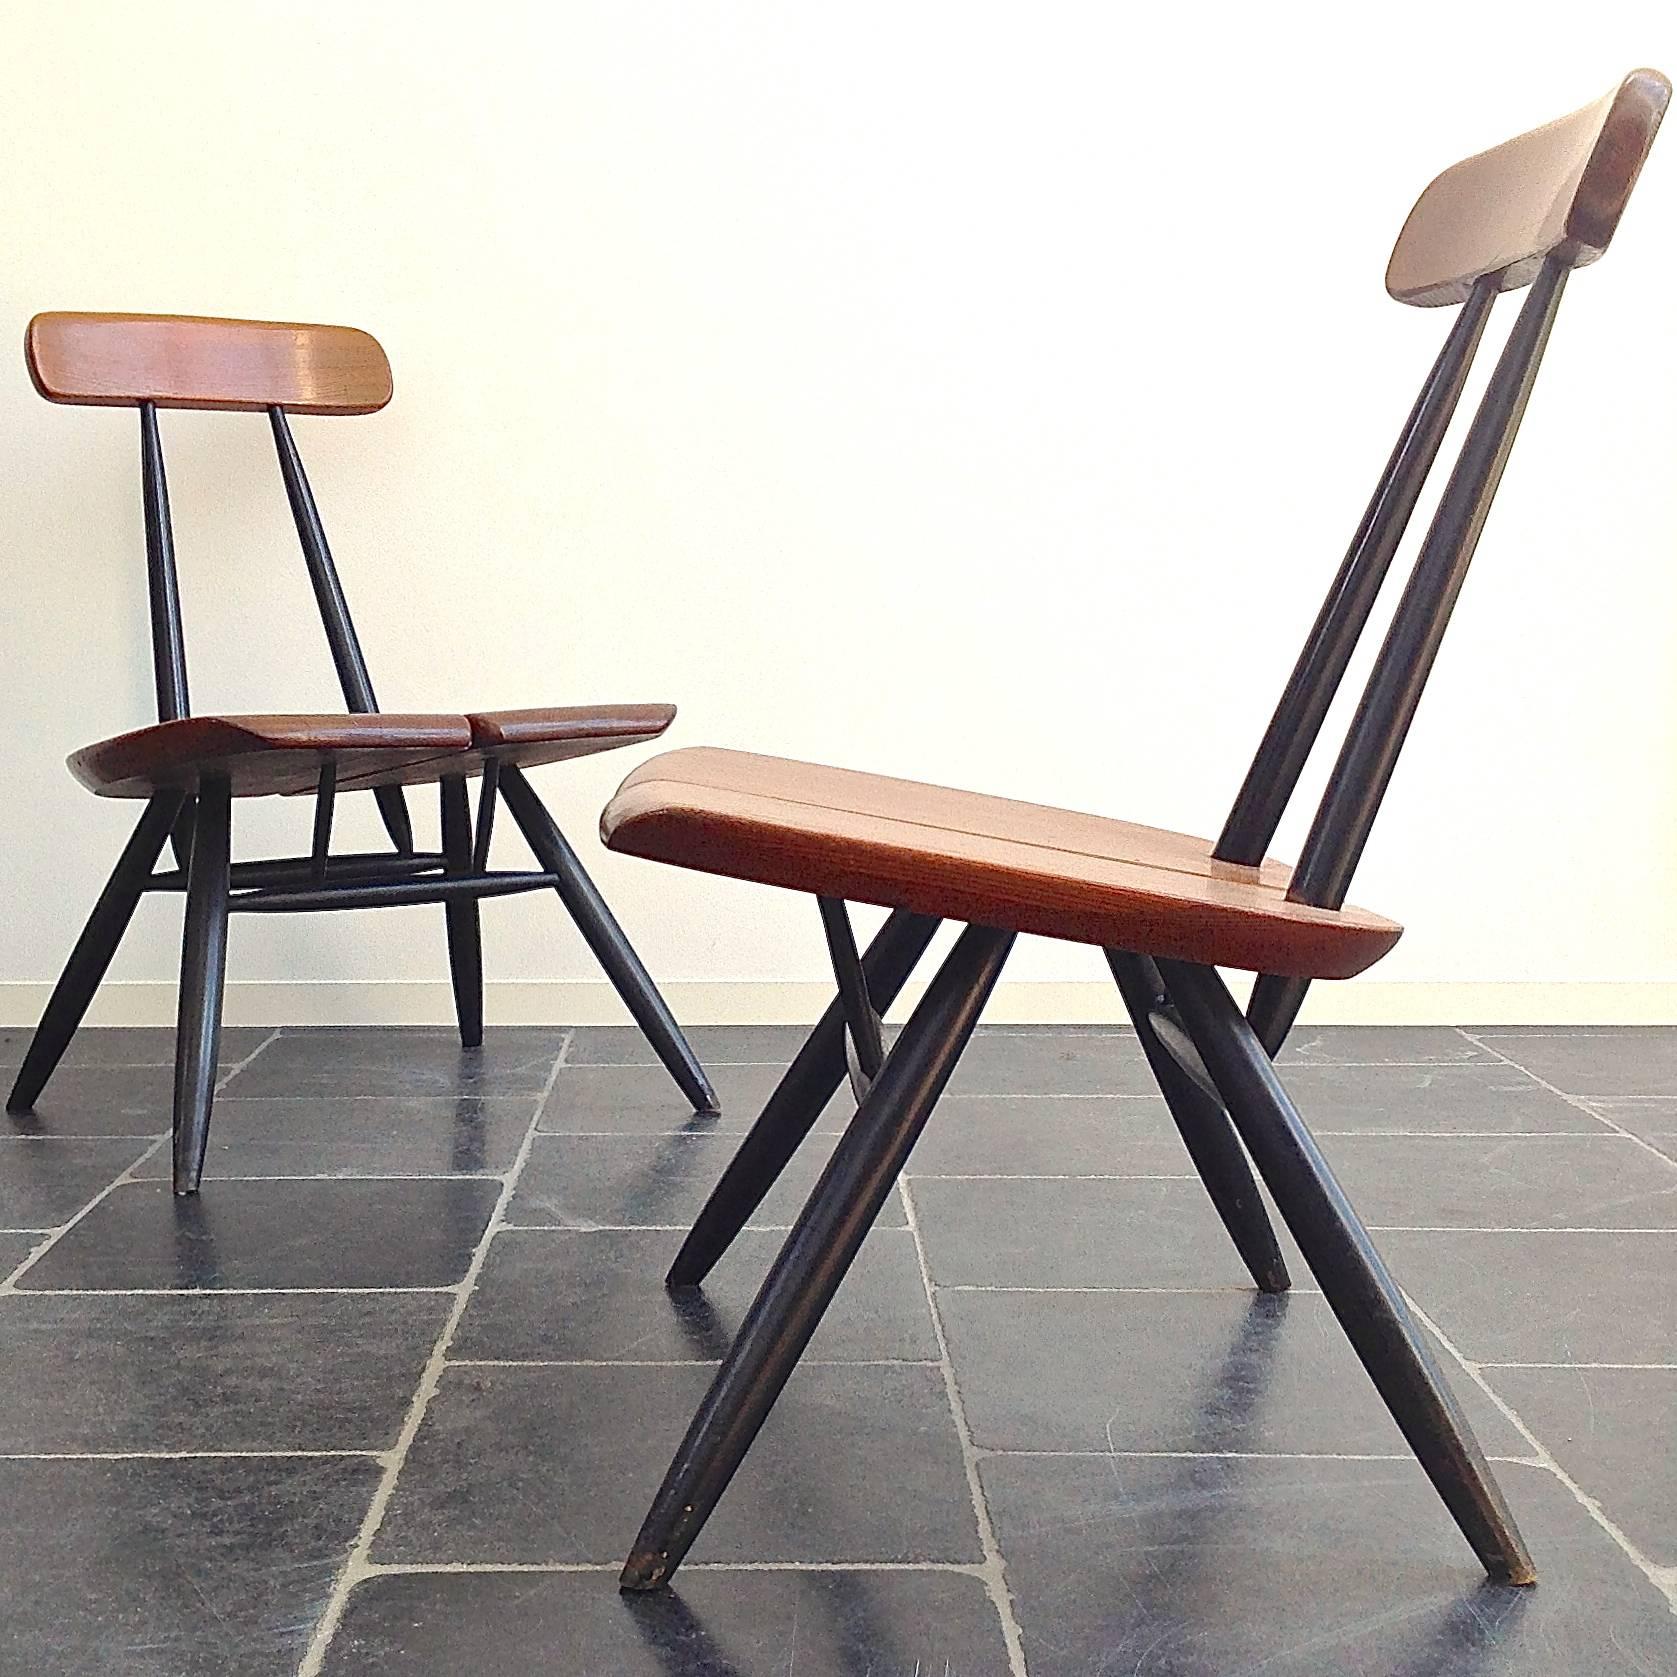 Mid-20th Century Easy Chairs by Ilmari Tapiovaara for Laukaan Puu, 1950s, Set of Two For Sale